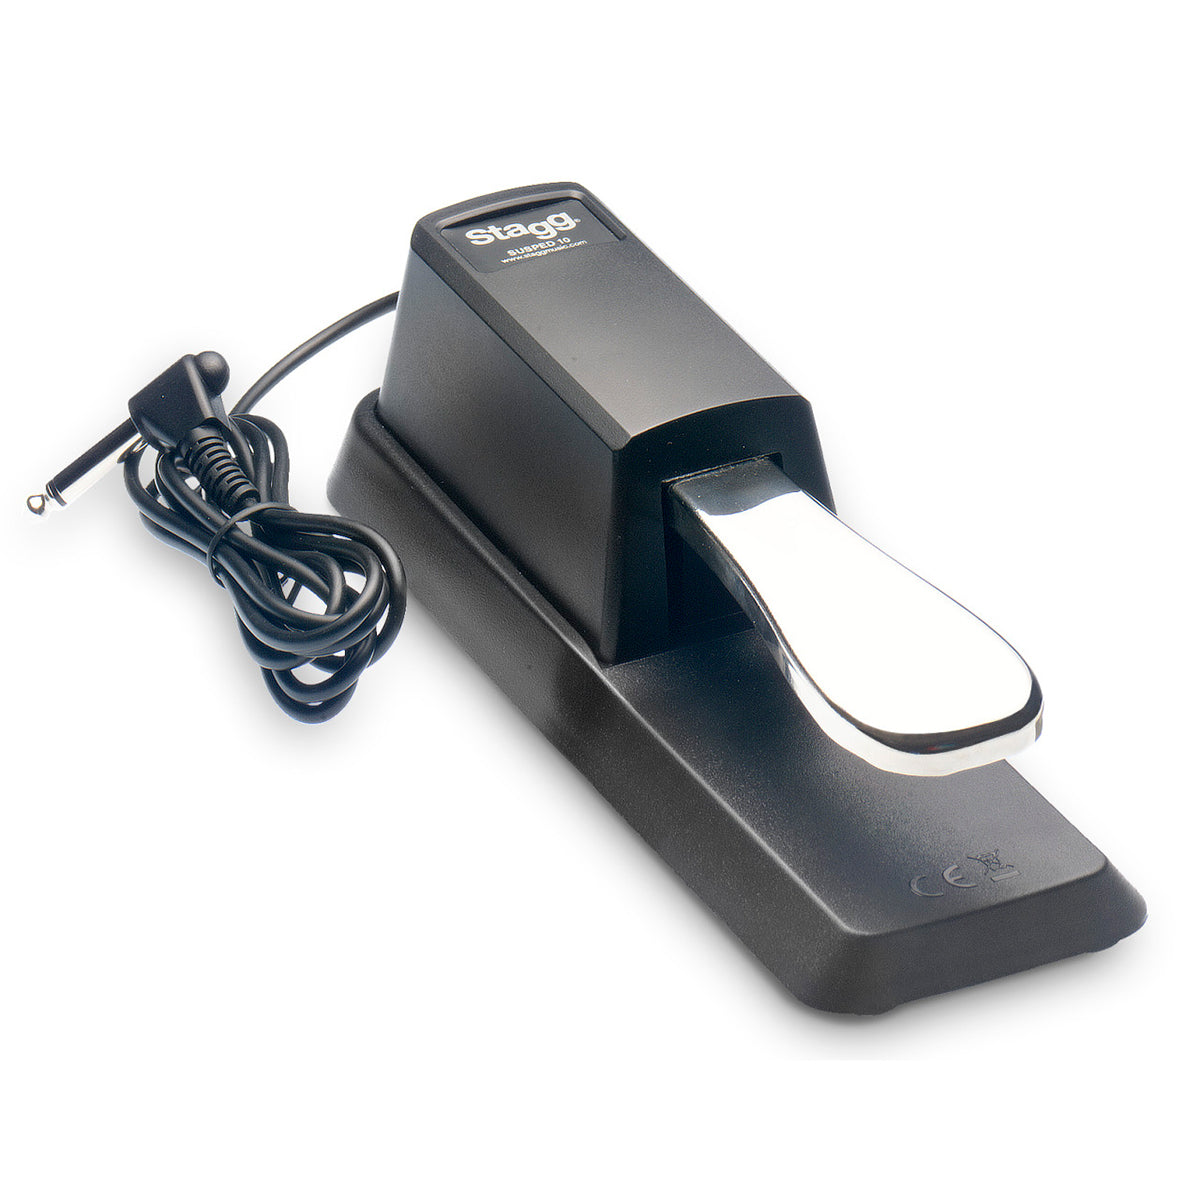 Stagg SUSPED 10 Keyboard Sustain Pedal